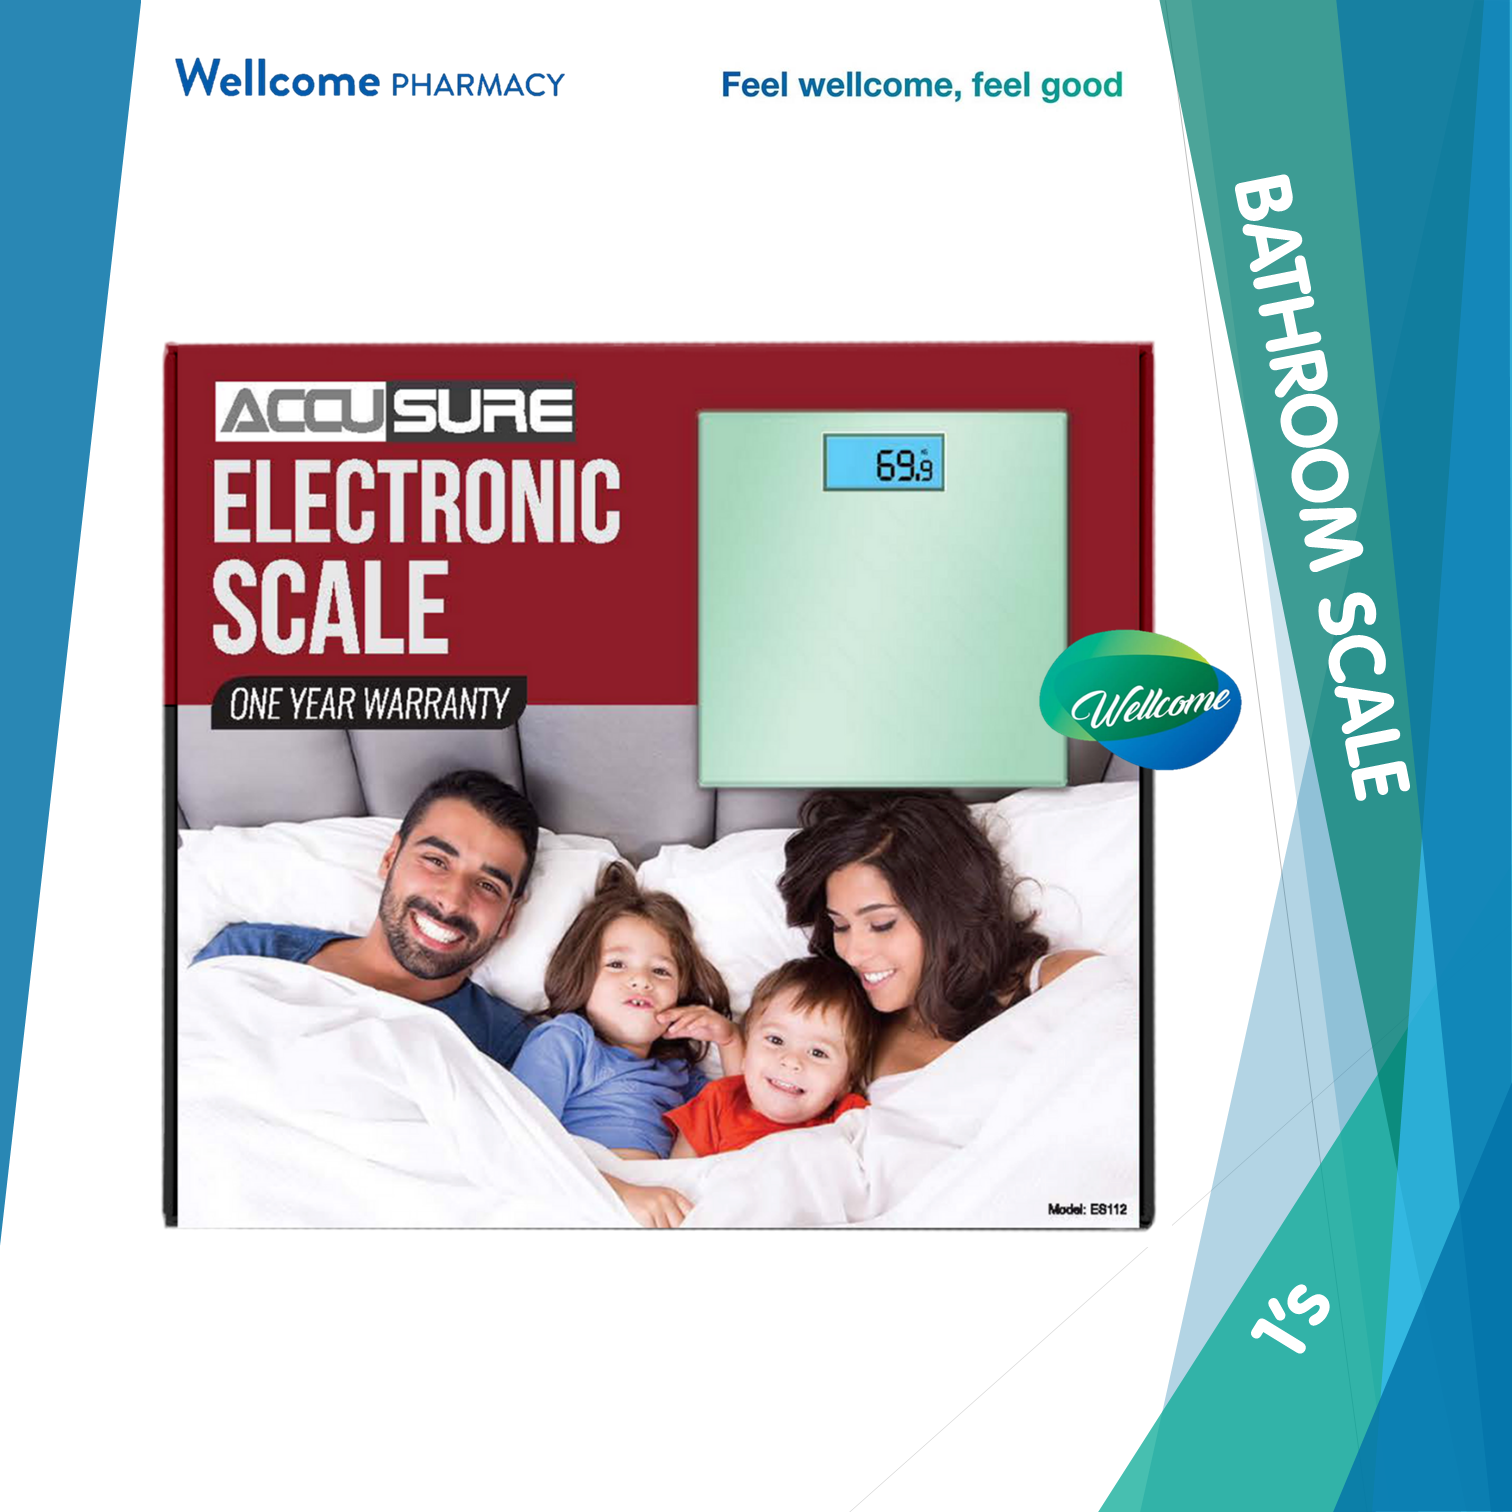 Accusure Electronic Scale